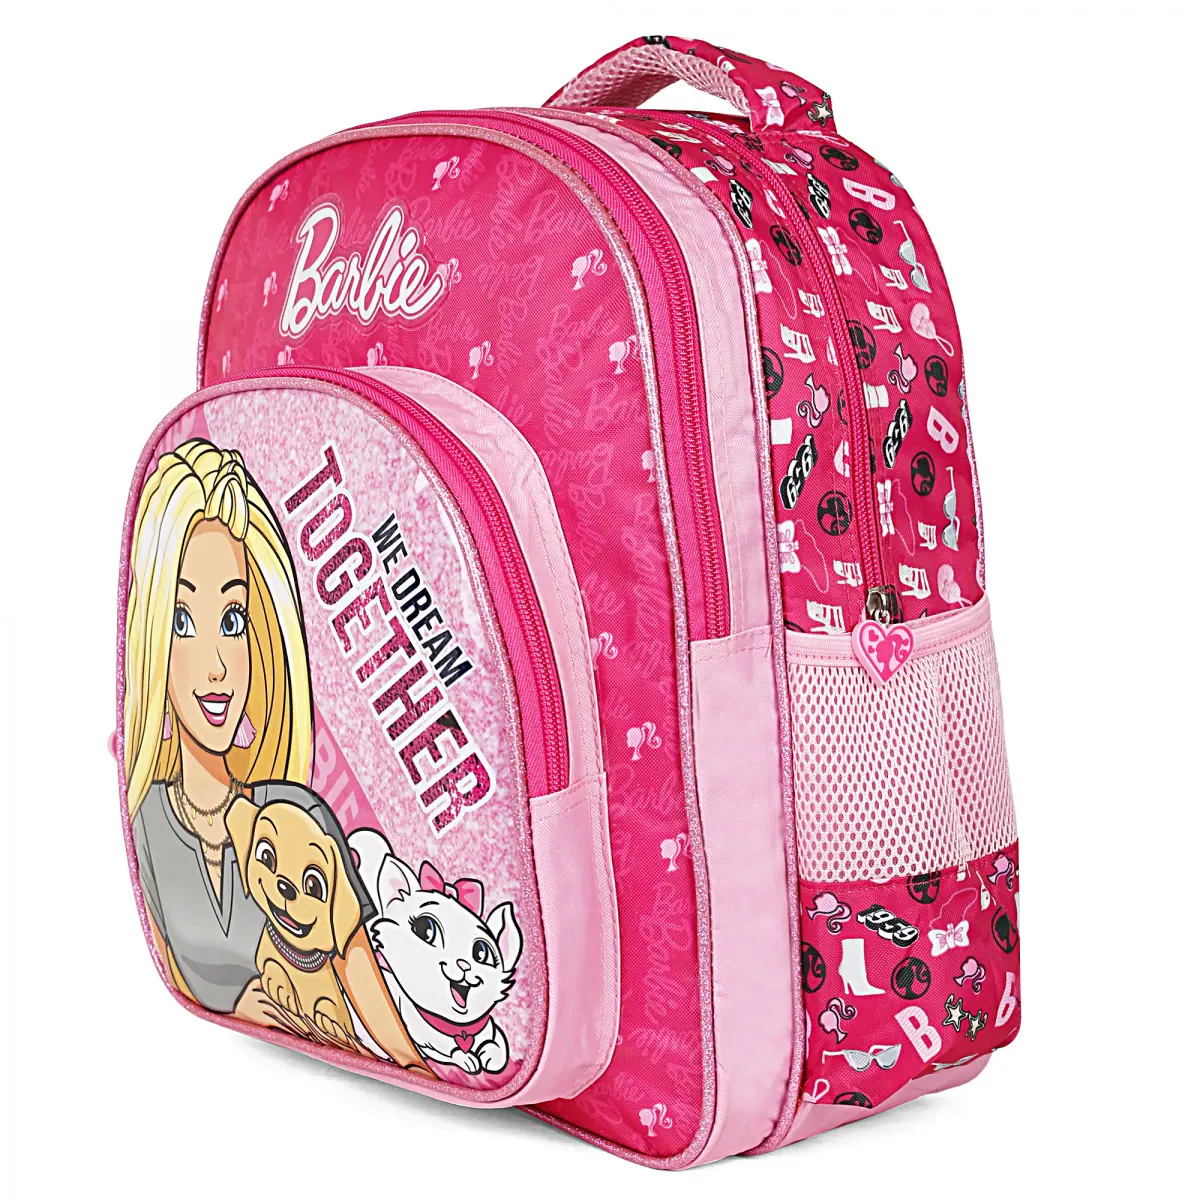 Barbie Together Bag Pack, 14Inches, Pink